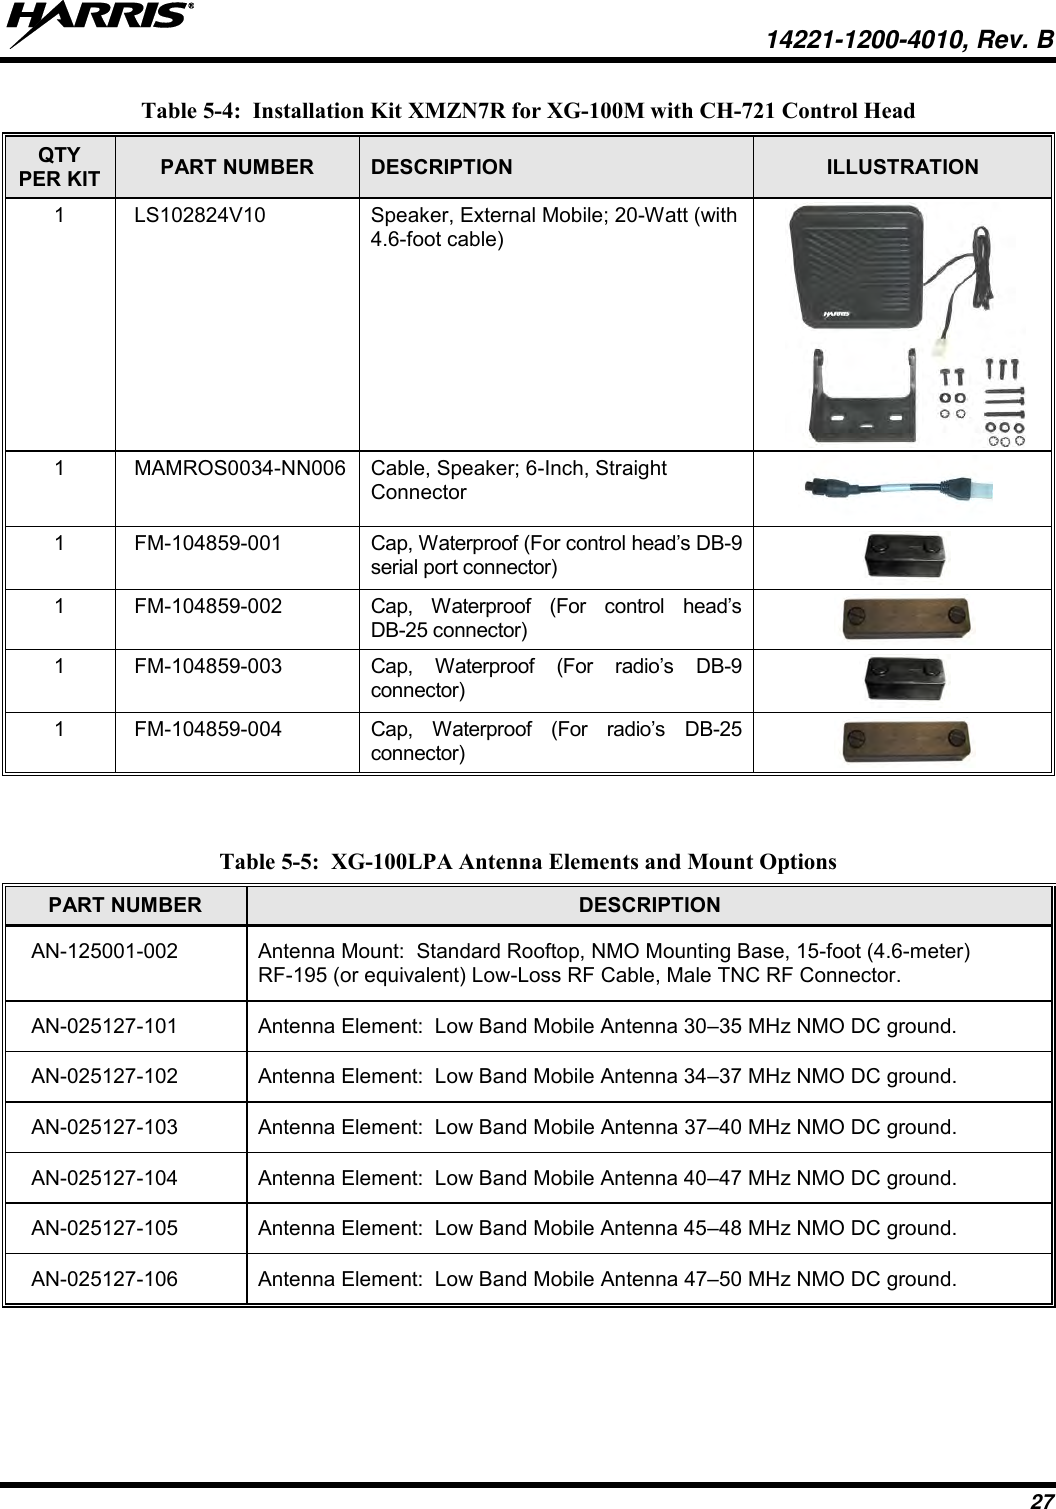   14221-1200-4010, Rev. B 27 Table 5-4:  Installation Kit XMZN7R for XG-100M with CH-721 Control Head QTY PER KIT PART NUMBER DESCRIPTION ILLUSTRATION 1 LS102824V10 Speaker, External Mobile; 20-Watt (with 4.6-foot cable)  1 MAMROS0034-NN006 Cable, Speaker; 6-Inch, Straight Connector  1 FM-104859-001 Cap, Waterproof (For control head’s DB-9 serial port connector)  1 FM-104859-002 Cap,  Waterproof  (For  control  head’s DB-25 connector)  1 FM-104859-003 Cap,  Waterproof  (For  radio’s  DB-9 connector)  1 FM-104859-004 Cap,  Waterproof  (For  radio’s  DB-25 connector)     Table 5-5:  XG-100LPA Antenna Elements and Mount Options  PART NUMBER DESCRIPTION AN-125001-002 Antenna Mount:  Standard Rooftop, NMO Mounting Base, 15-foot (4.6-meter) RF-195 (or equivalent) Low-Loss RF Cable, Male TNC RF Connector. AN-025127-101 Antenna Element:  Low Band Mobile Antenna 30–35 MHz NMO DC ground. AN-025127-102 Antenna Element:  Low Band Mobile Antenna 34–37 MHz NMO DC ground. AN-025127-103 Antenna Element:  Low Band Mobile Antenna 37–40 MHz NMO DC ground. AN-025127-104 Antenna Element:  Low Band Mobile Antenna 40–47 MHz NMO DC ground. AN-025127-105 Antenna Element:  Low Band Mobile Antenna 45–48 MHz NMO DC ground. AN-025127-106 Antenna Element:  Low Band Mobile Antenna 47–50 MHz NMO DC ground.    